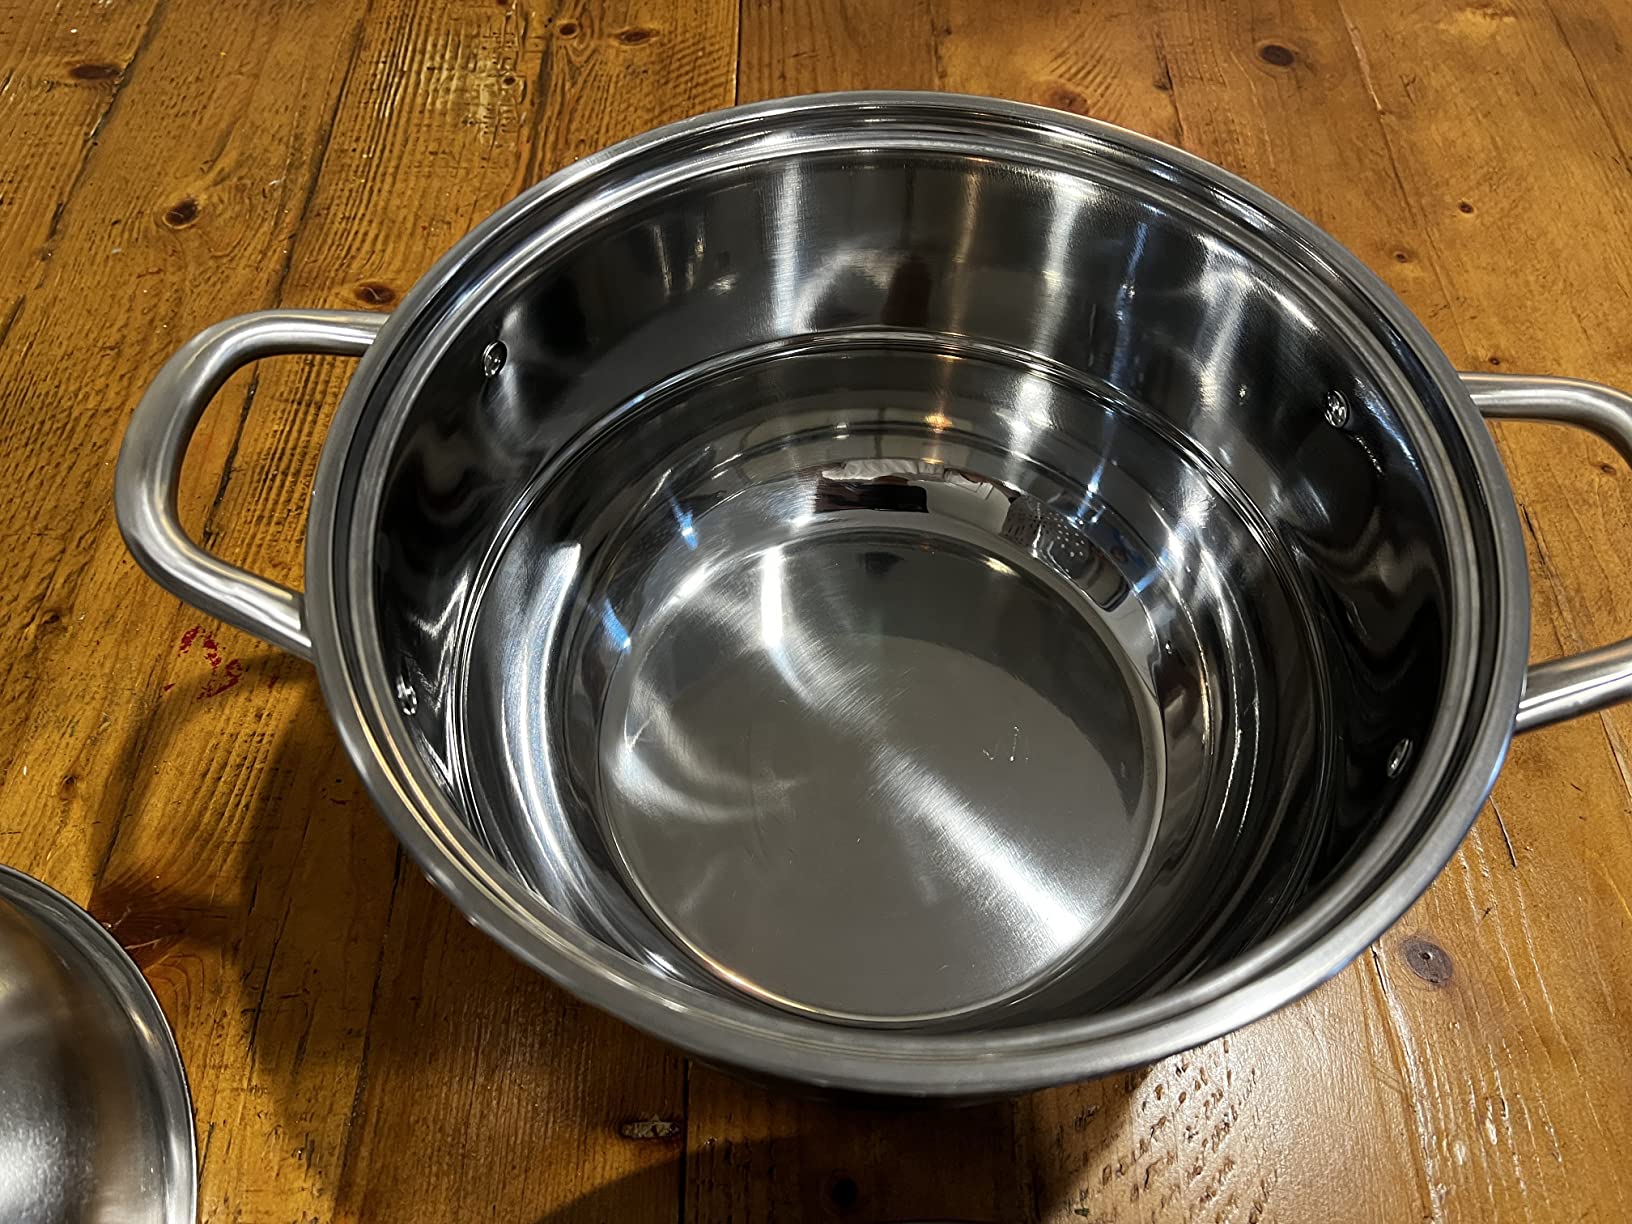 this steamer pot is a must-have for your kitchen